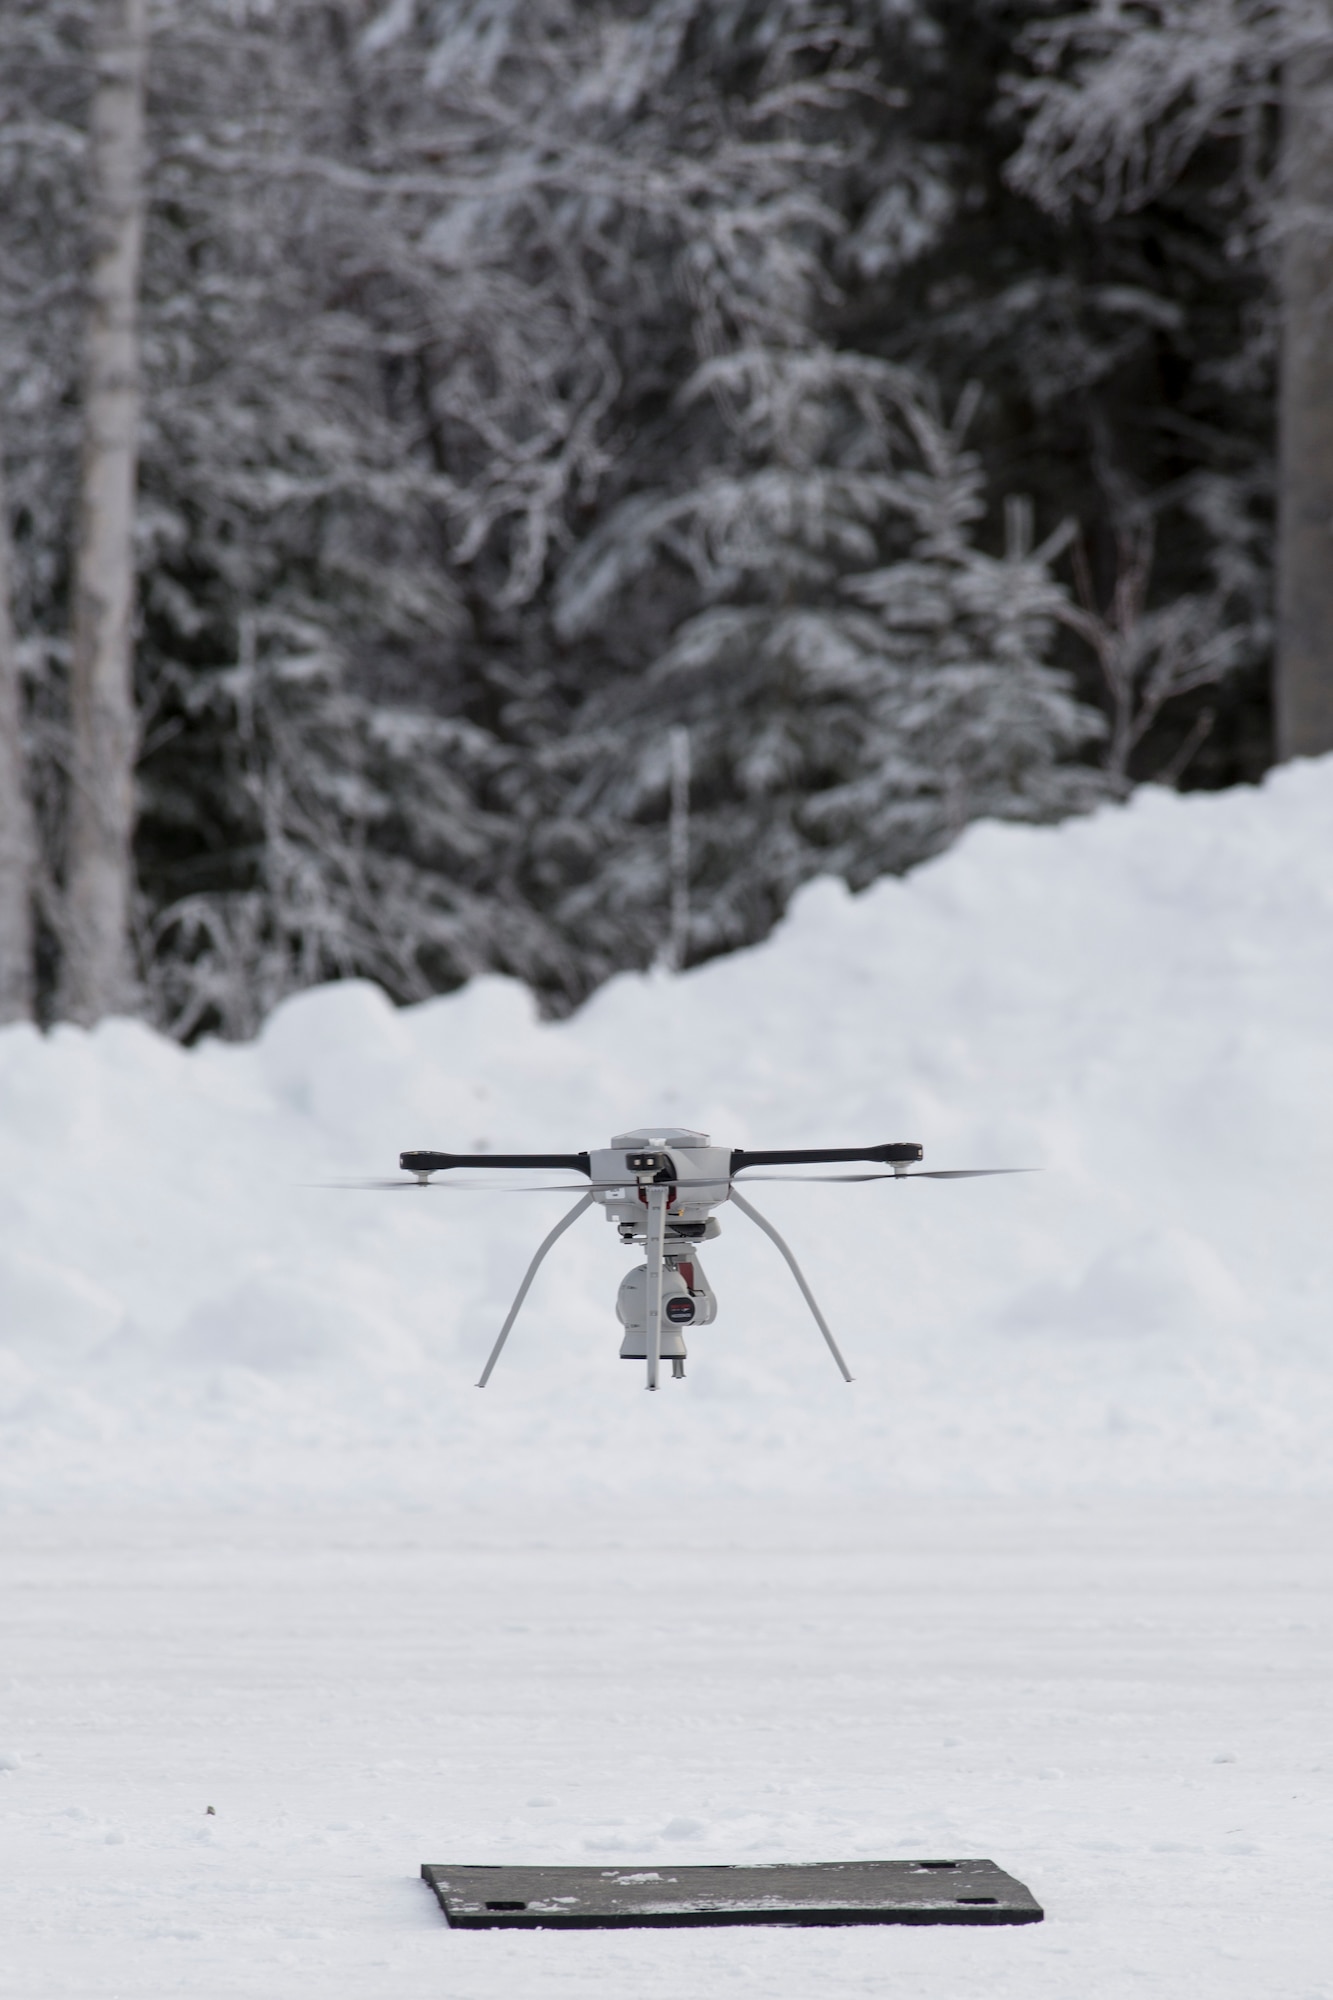 U.S. Air Force civil engineers fly a Small Unmanned Aircraft System during a newly adopted Rapid Airfield Damage Assessment System training course at Joint Base Elmendorf-Richardson, Alaska, Jan. 23, 2019. Throughout the first week of training, Airmen focused on learning to fly the SUAS. During the second week they learned to fly the RADAS mission while using the SUAS systems.